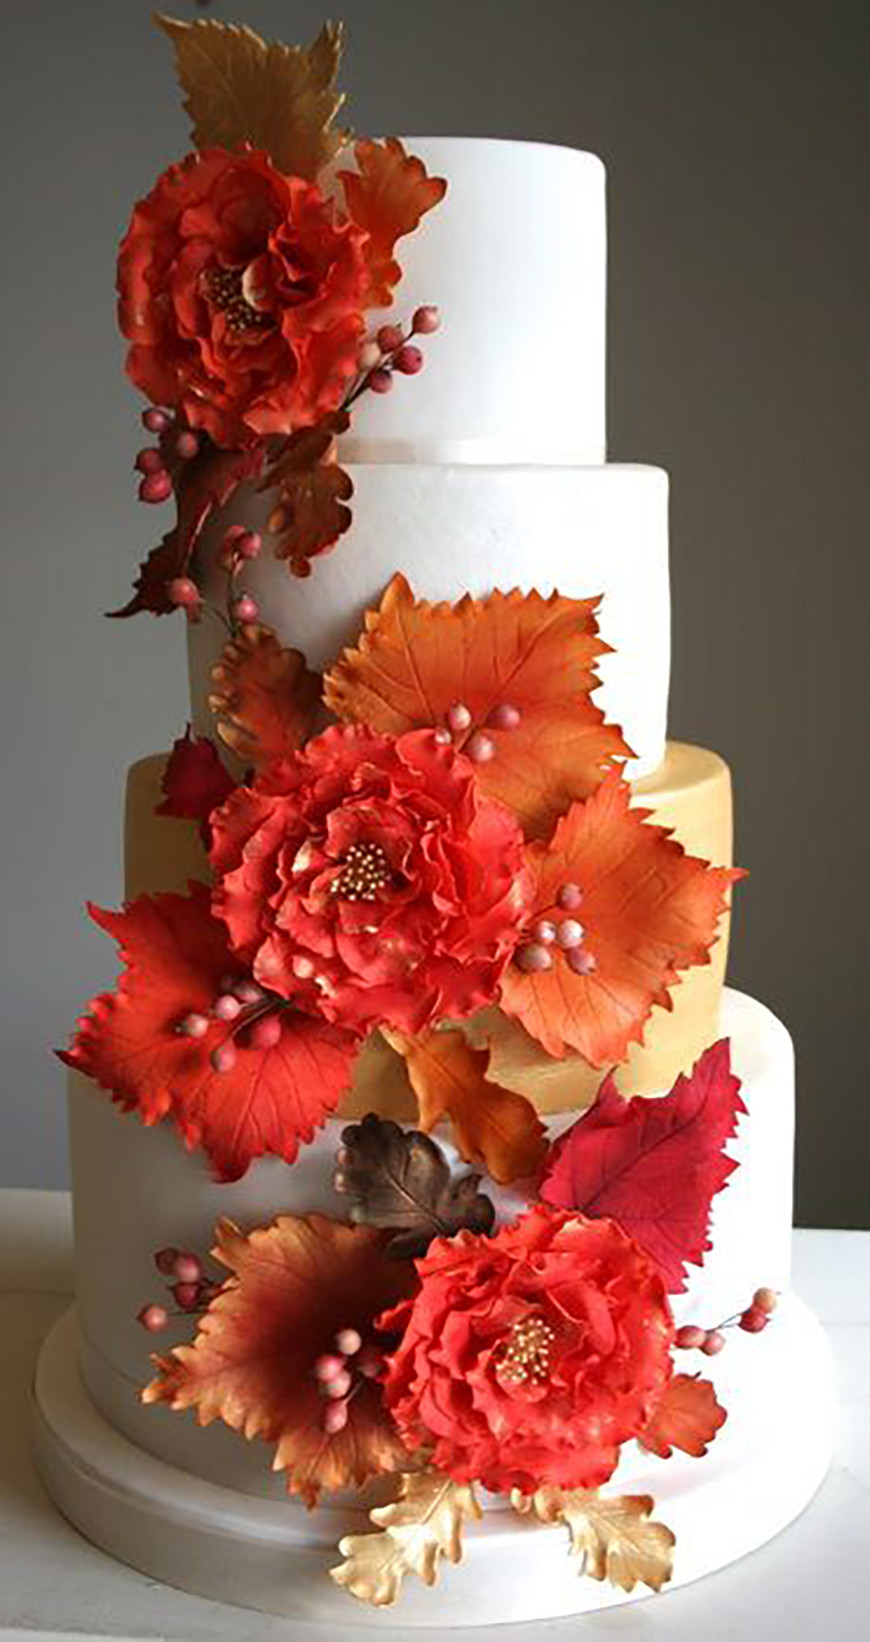 Autumnal Wedding Cakes
 The Best Autumnal Wedding Colours